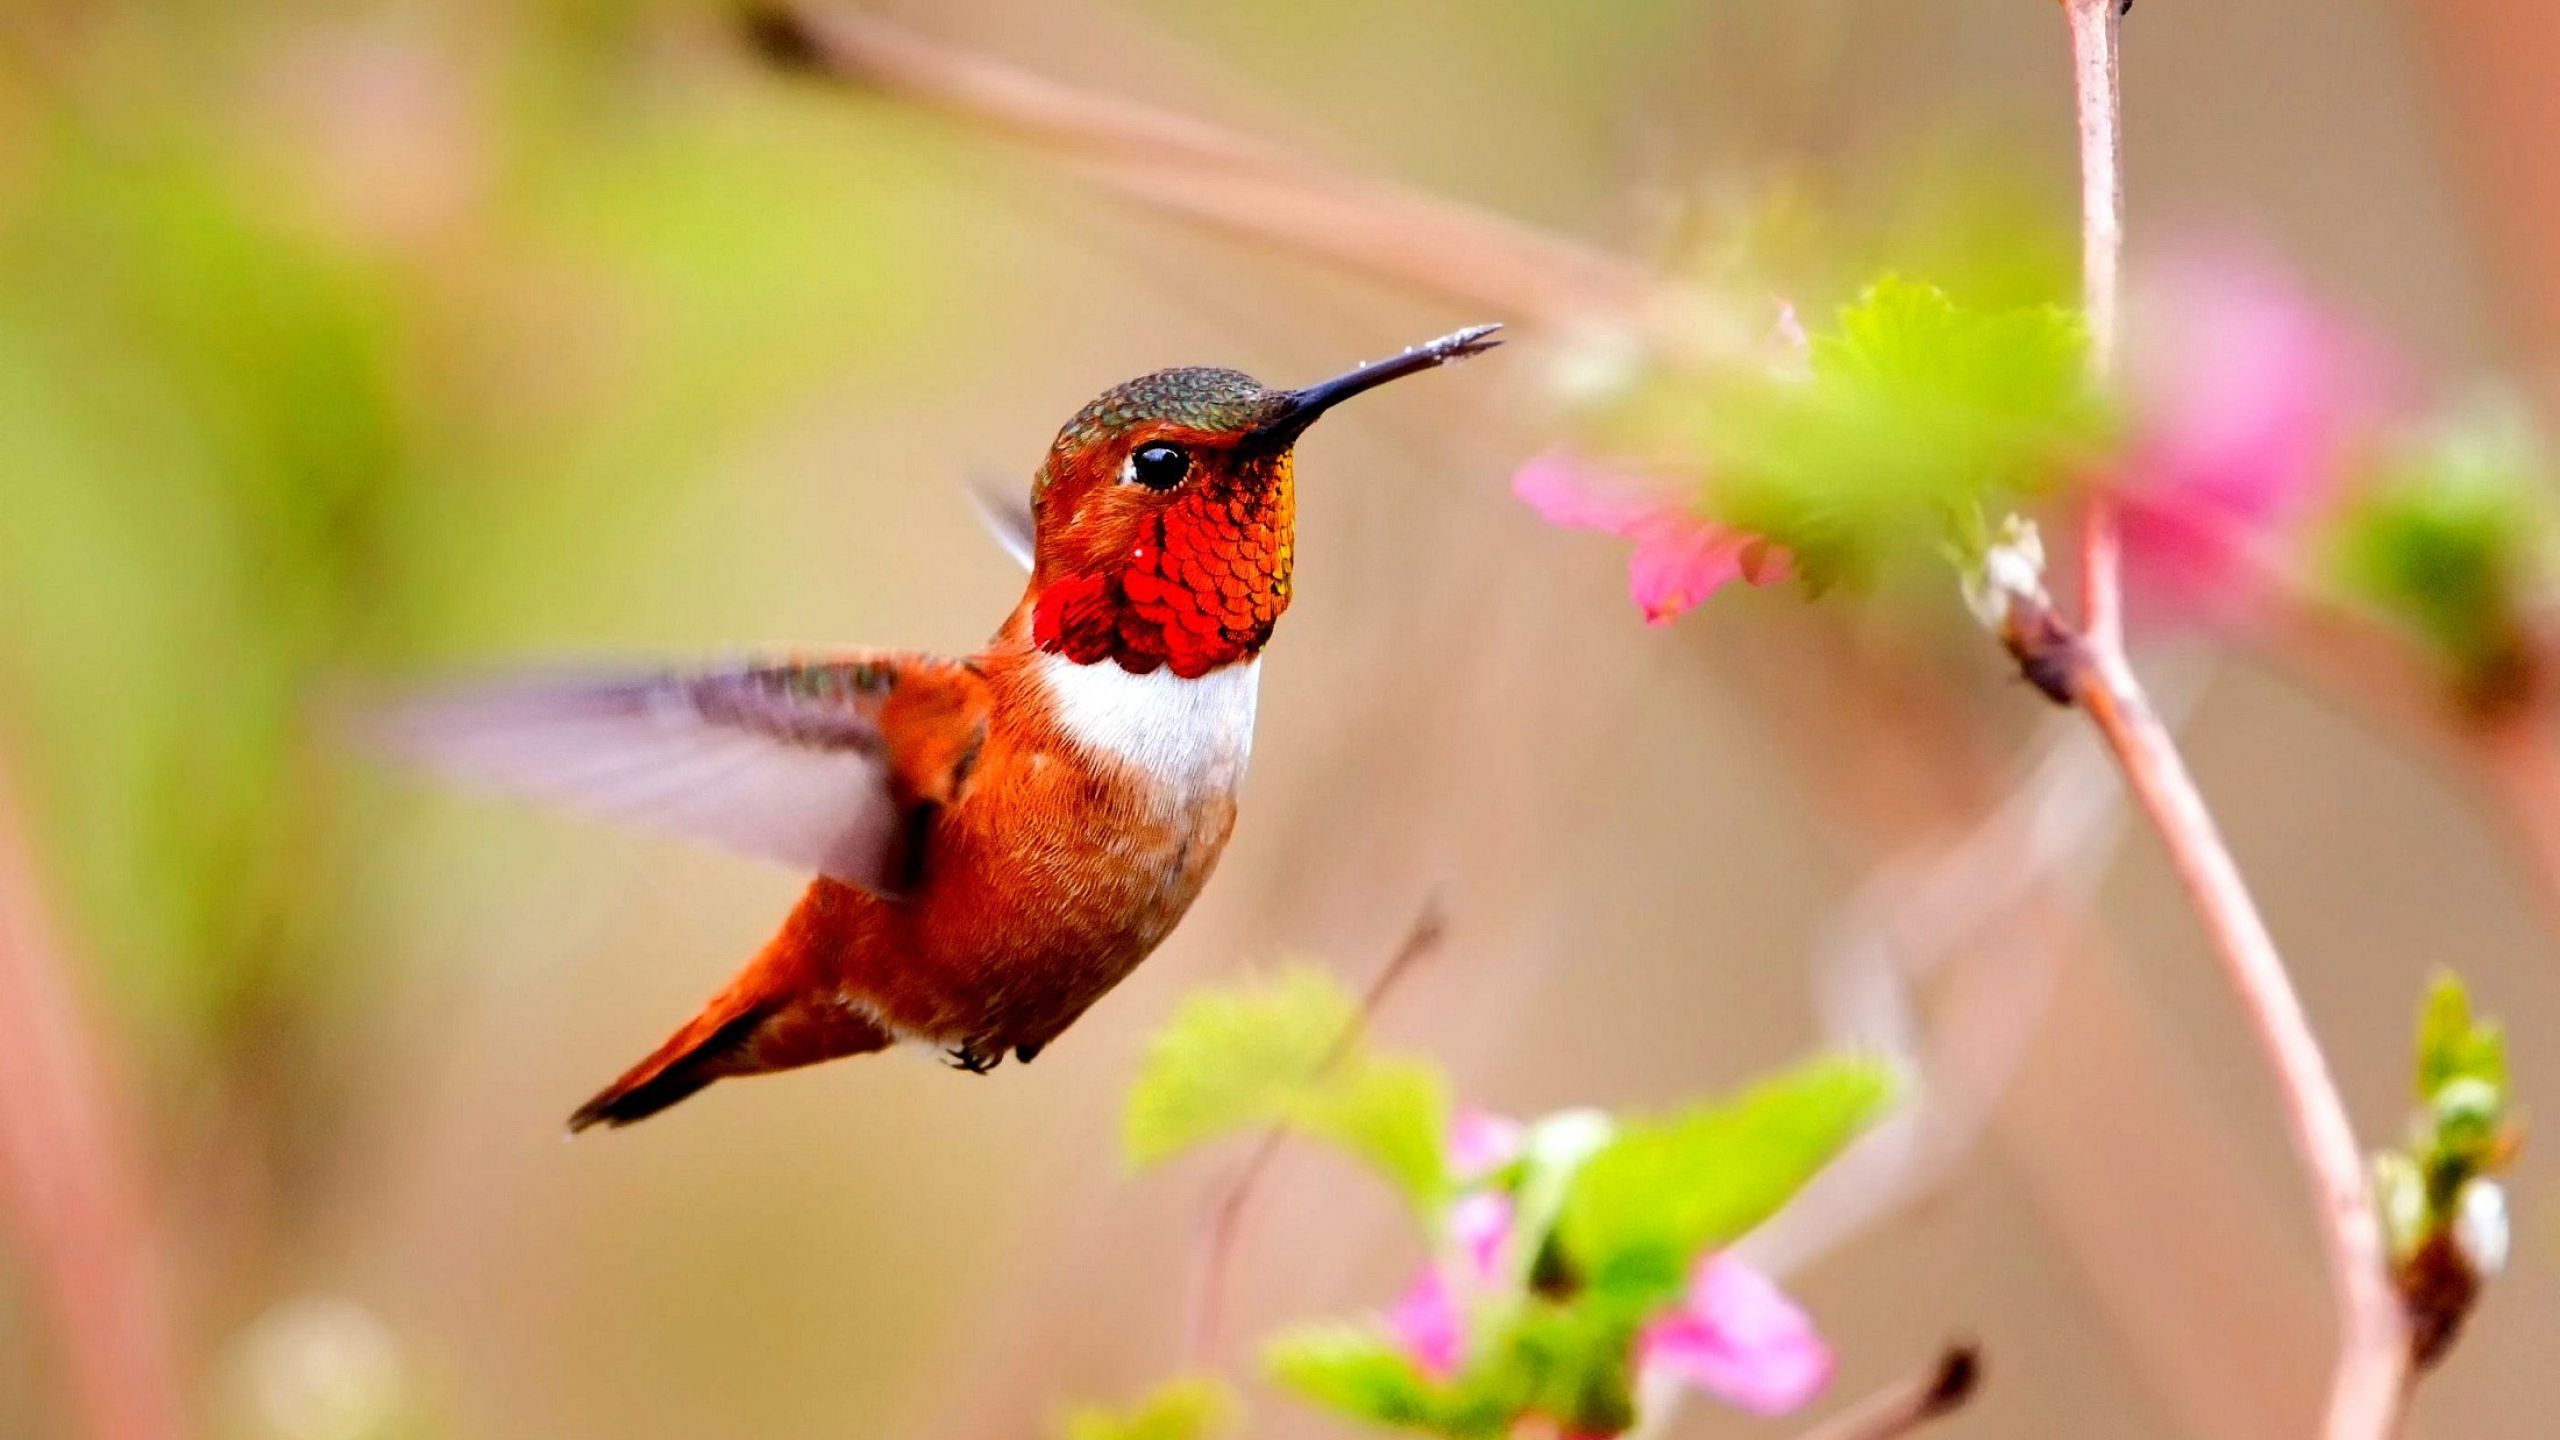 Colorful Hummingbird and Flower Wallpaper and Birds